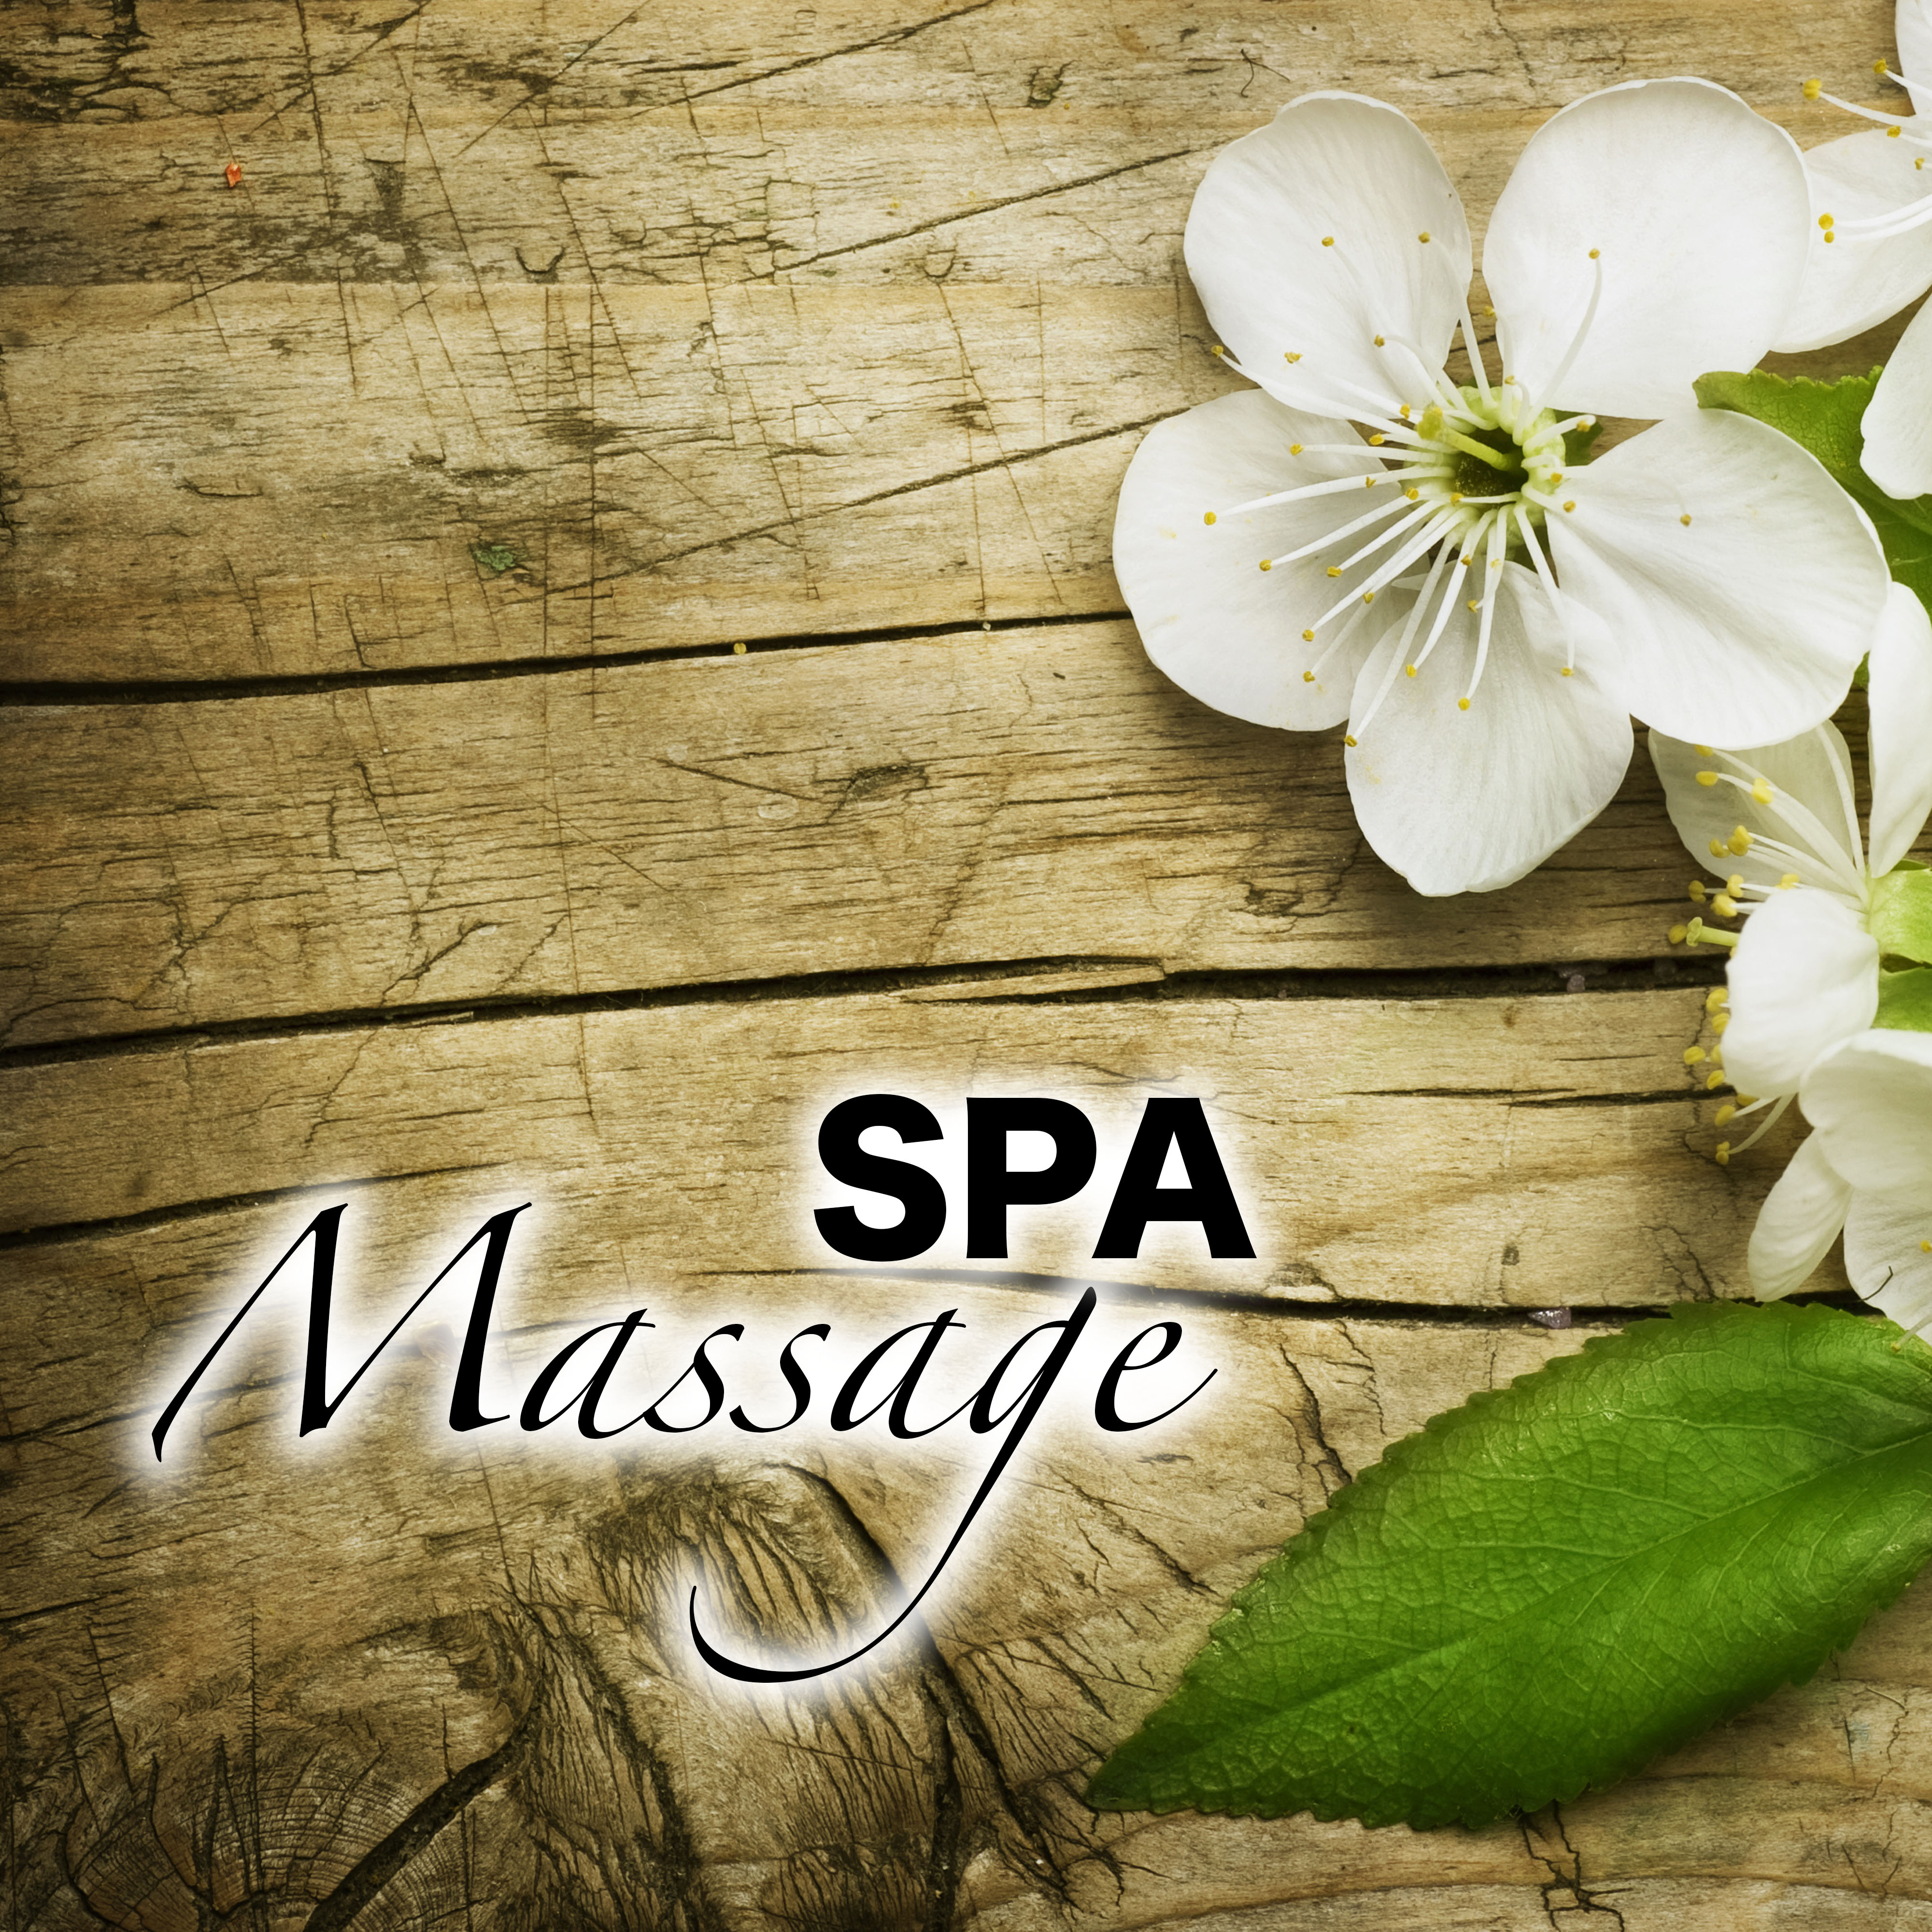 Spa Massage - Reiki, Spas Flutes Songs & Zen Relaxation Music, Native American Flute, Classical Tracks for Relax